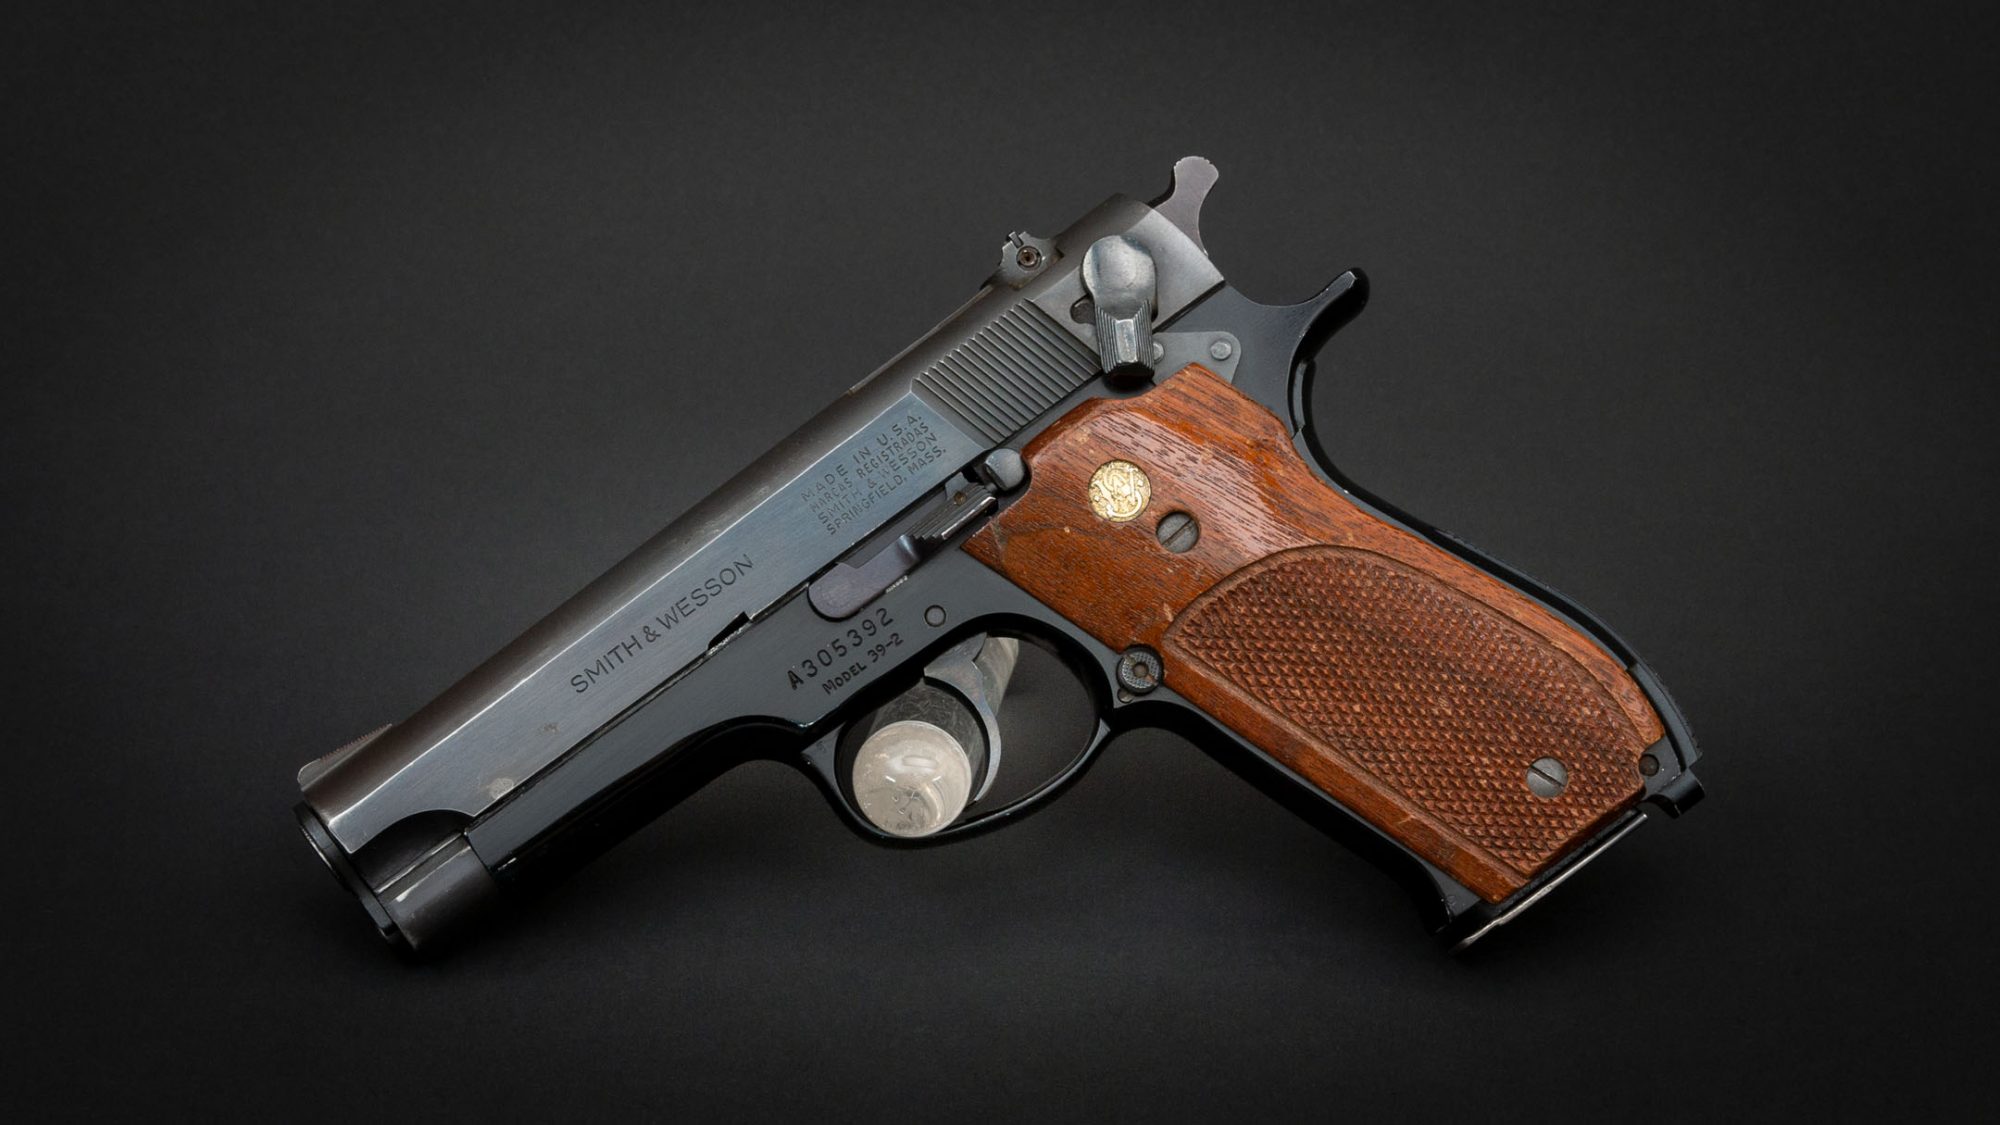 Smith & Wesson Model 39-2, for sale by Turnbull Restoration Co. of Bloomfield, NY